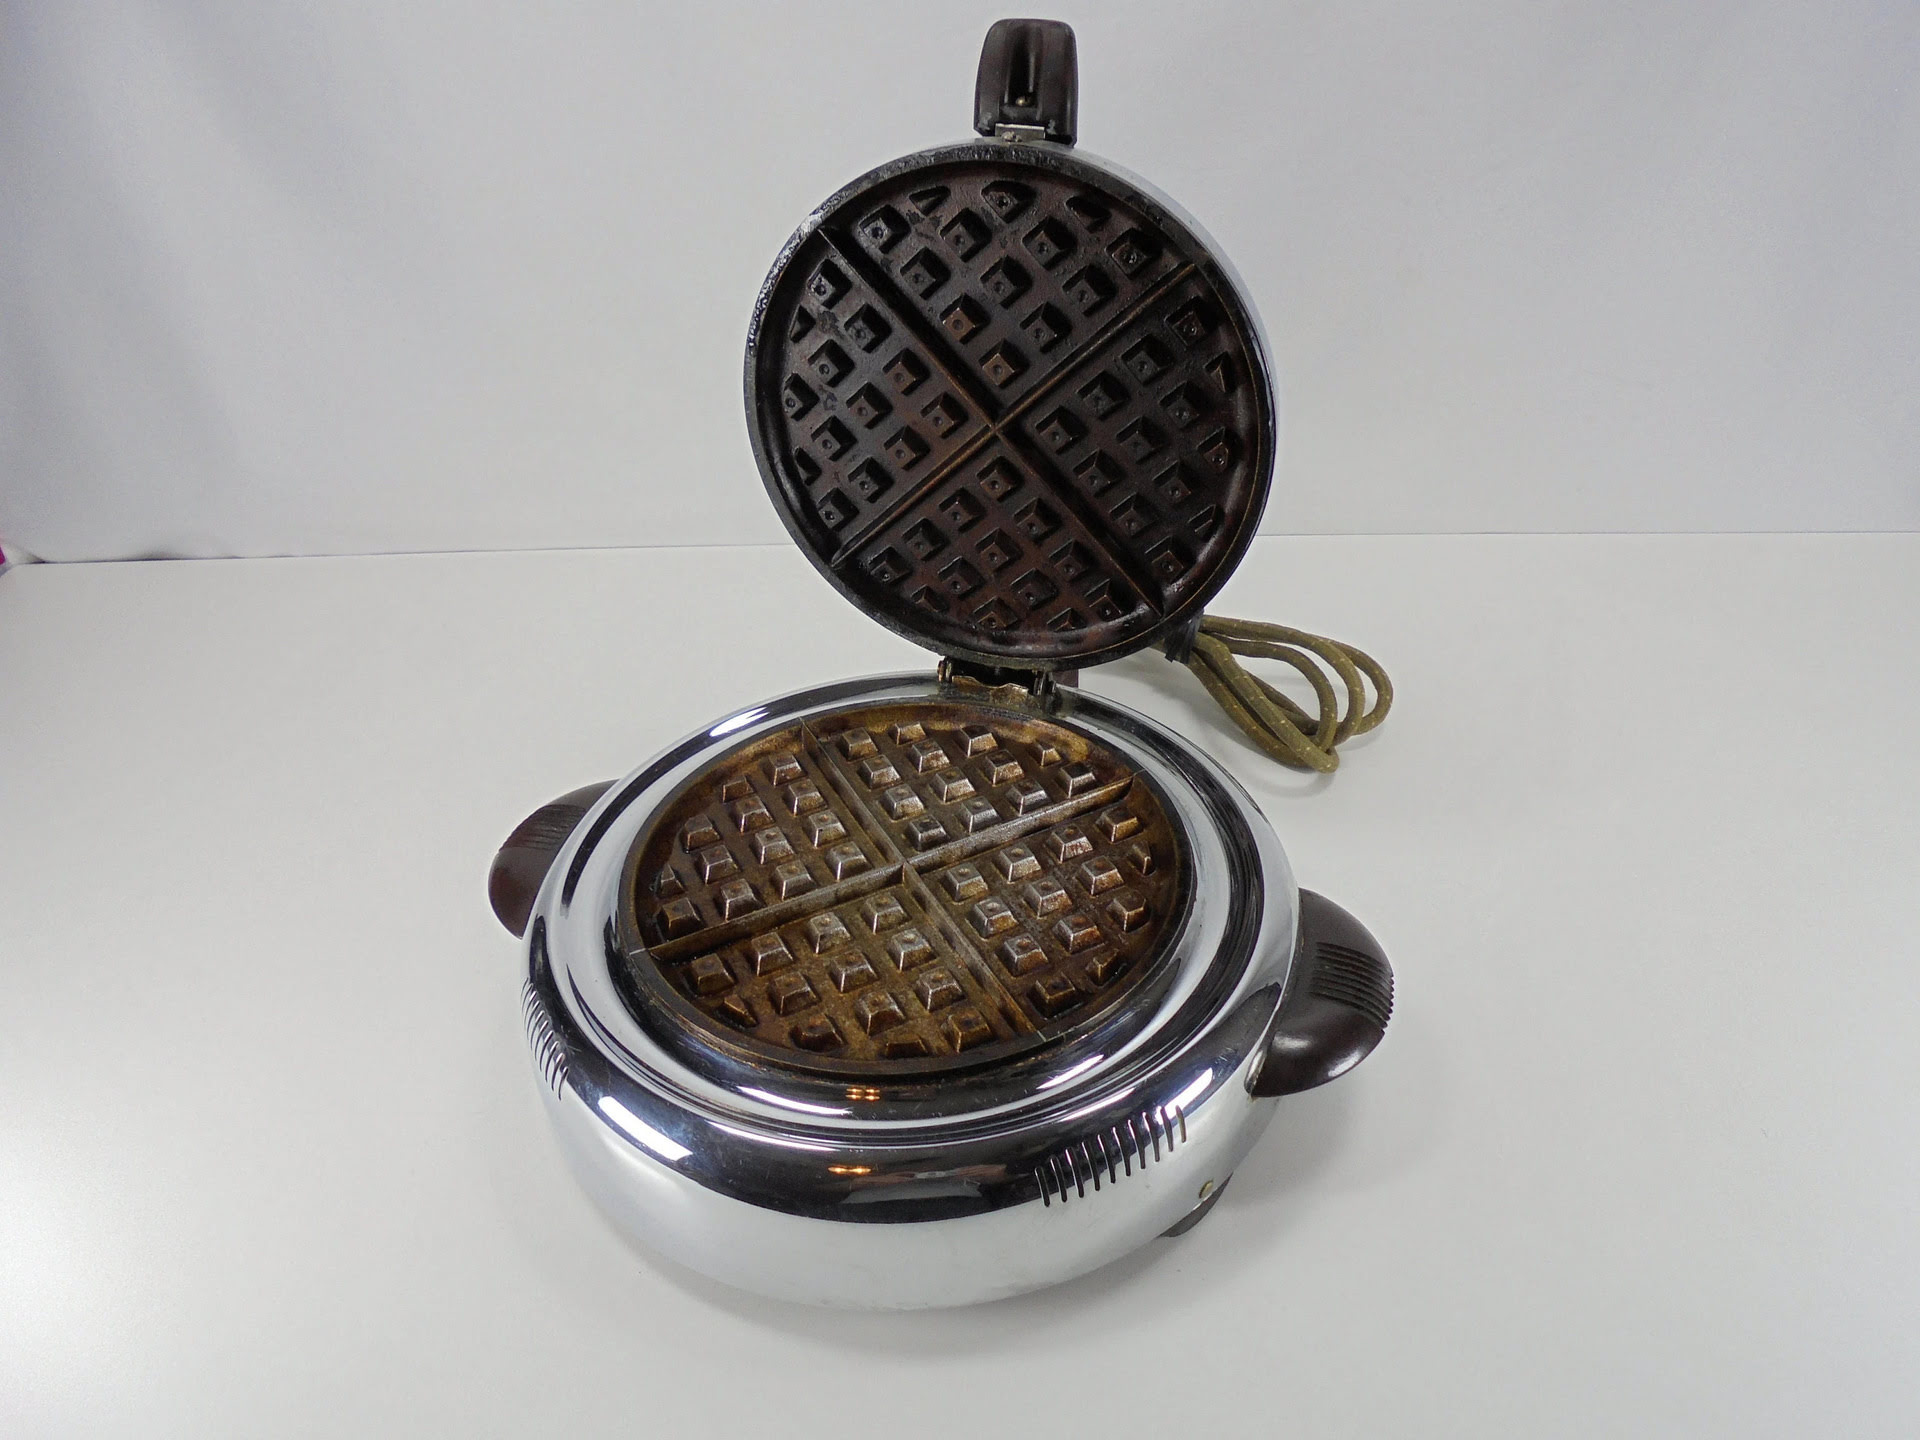 How To Clean A Vintage Stainless Steel GE Waffle Iron